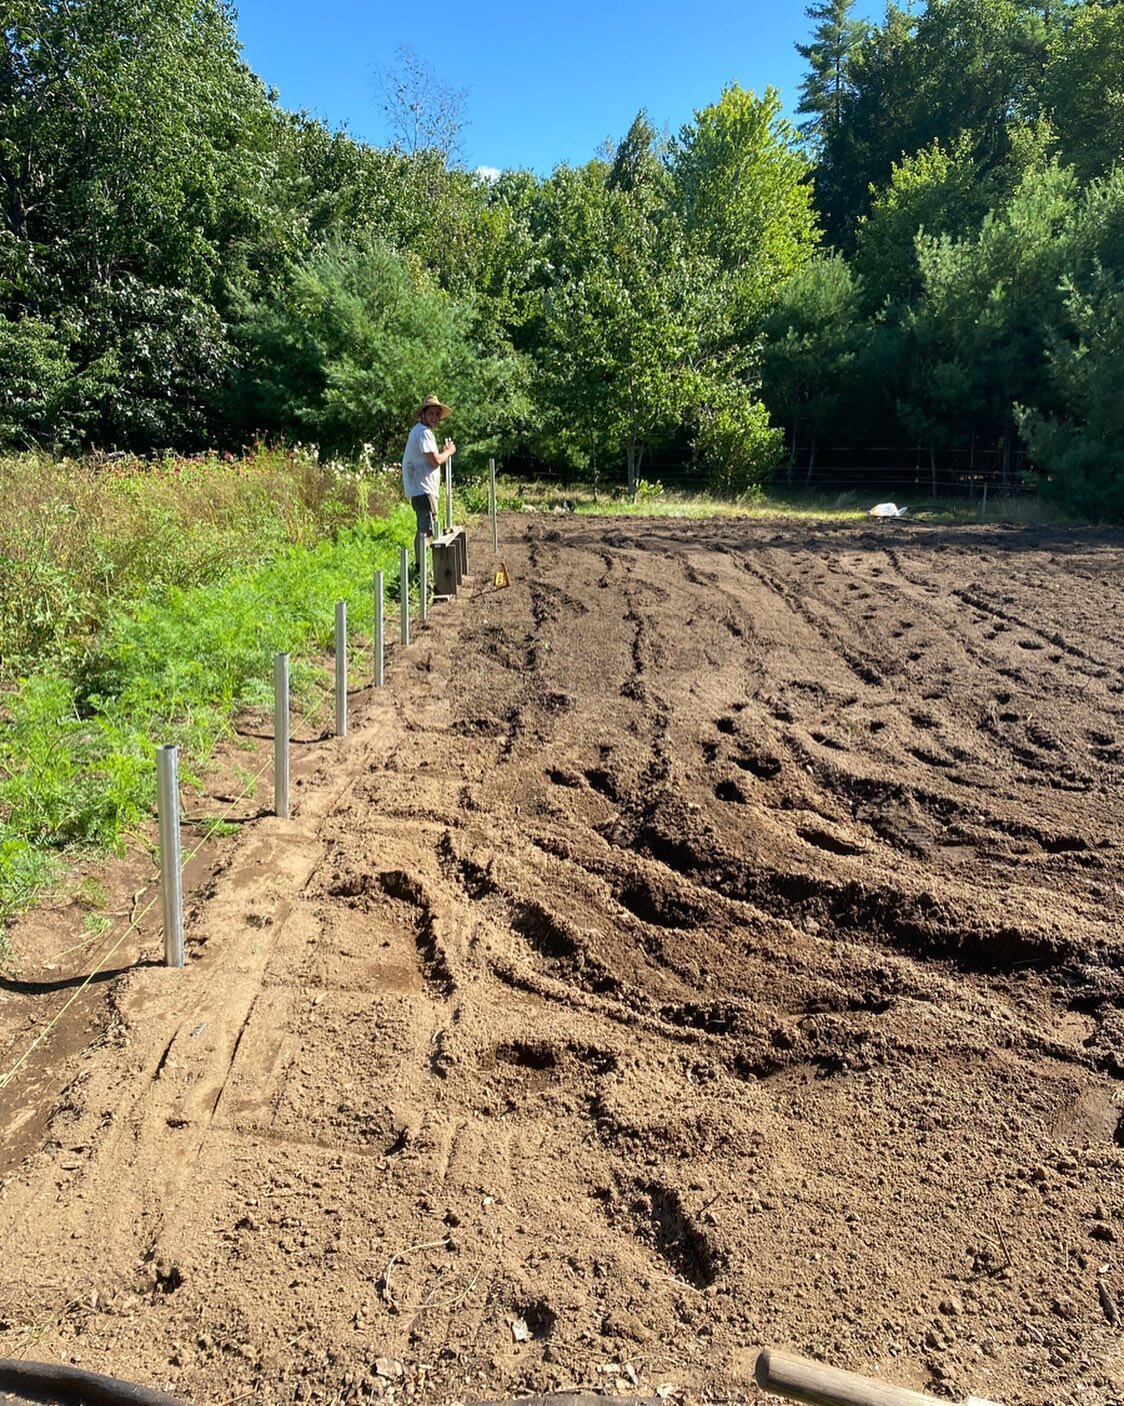 Prepping ground for high tunnel #2. Thanks to our friends @esperanzafarmmaine for helping haul down the caterpillar tunnel, we&rsquo;re excited it will find a new home in the neighborhood!